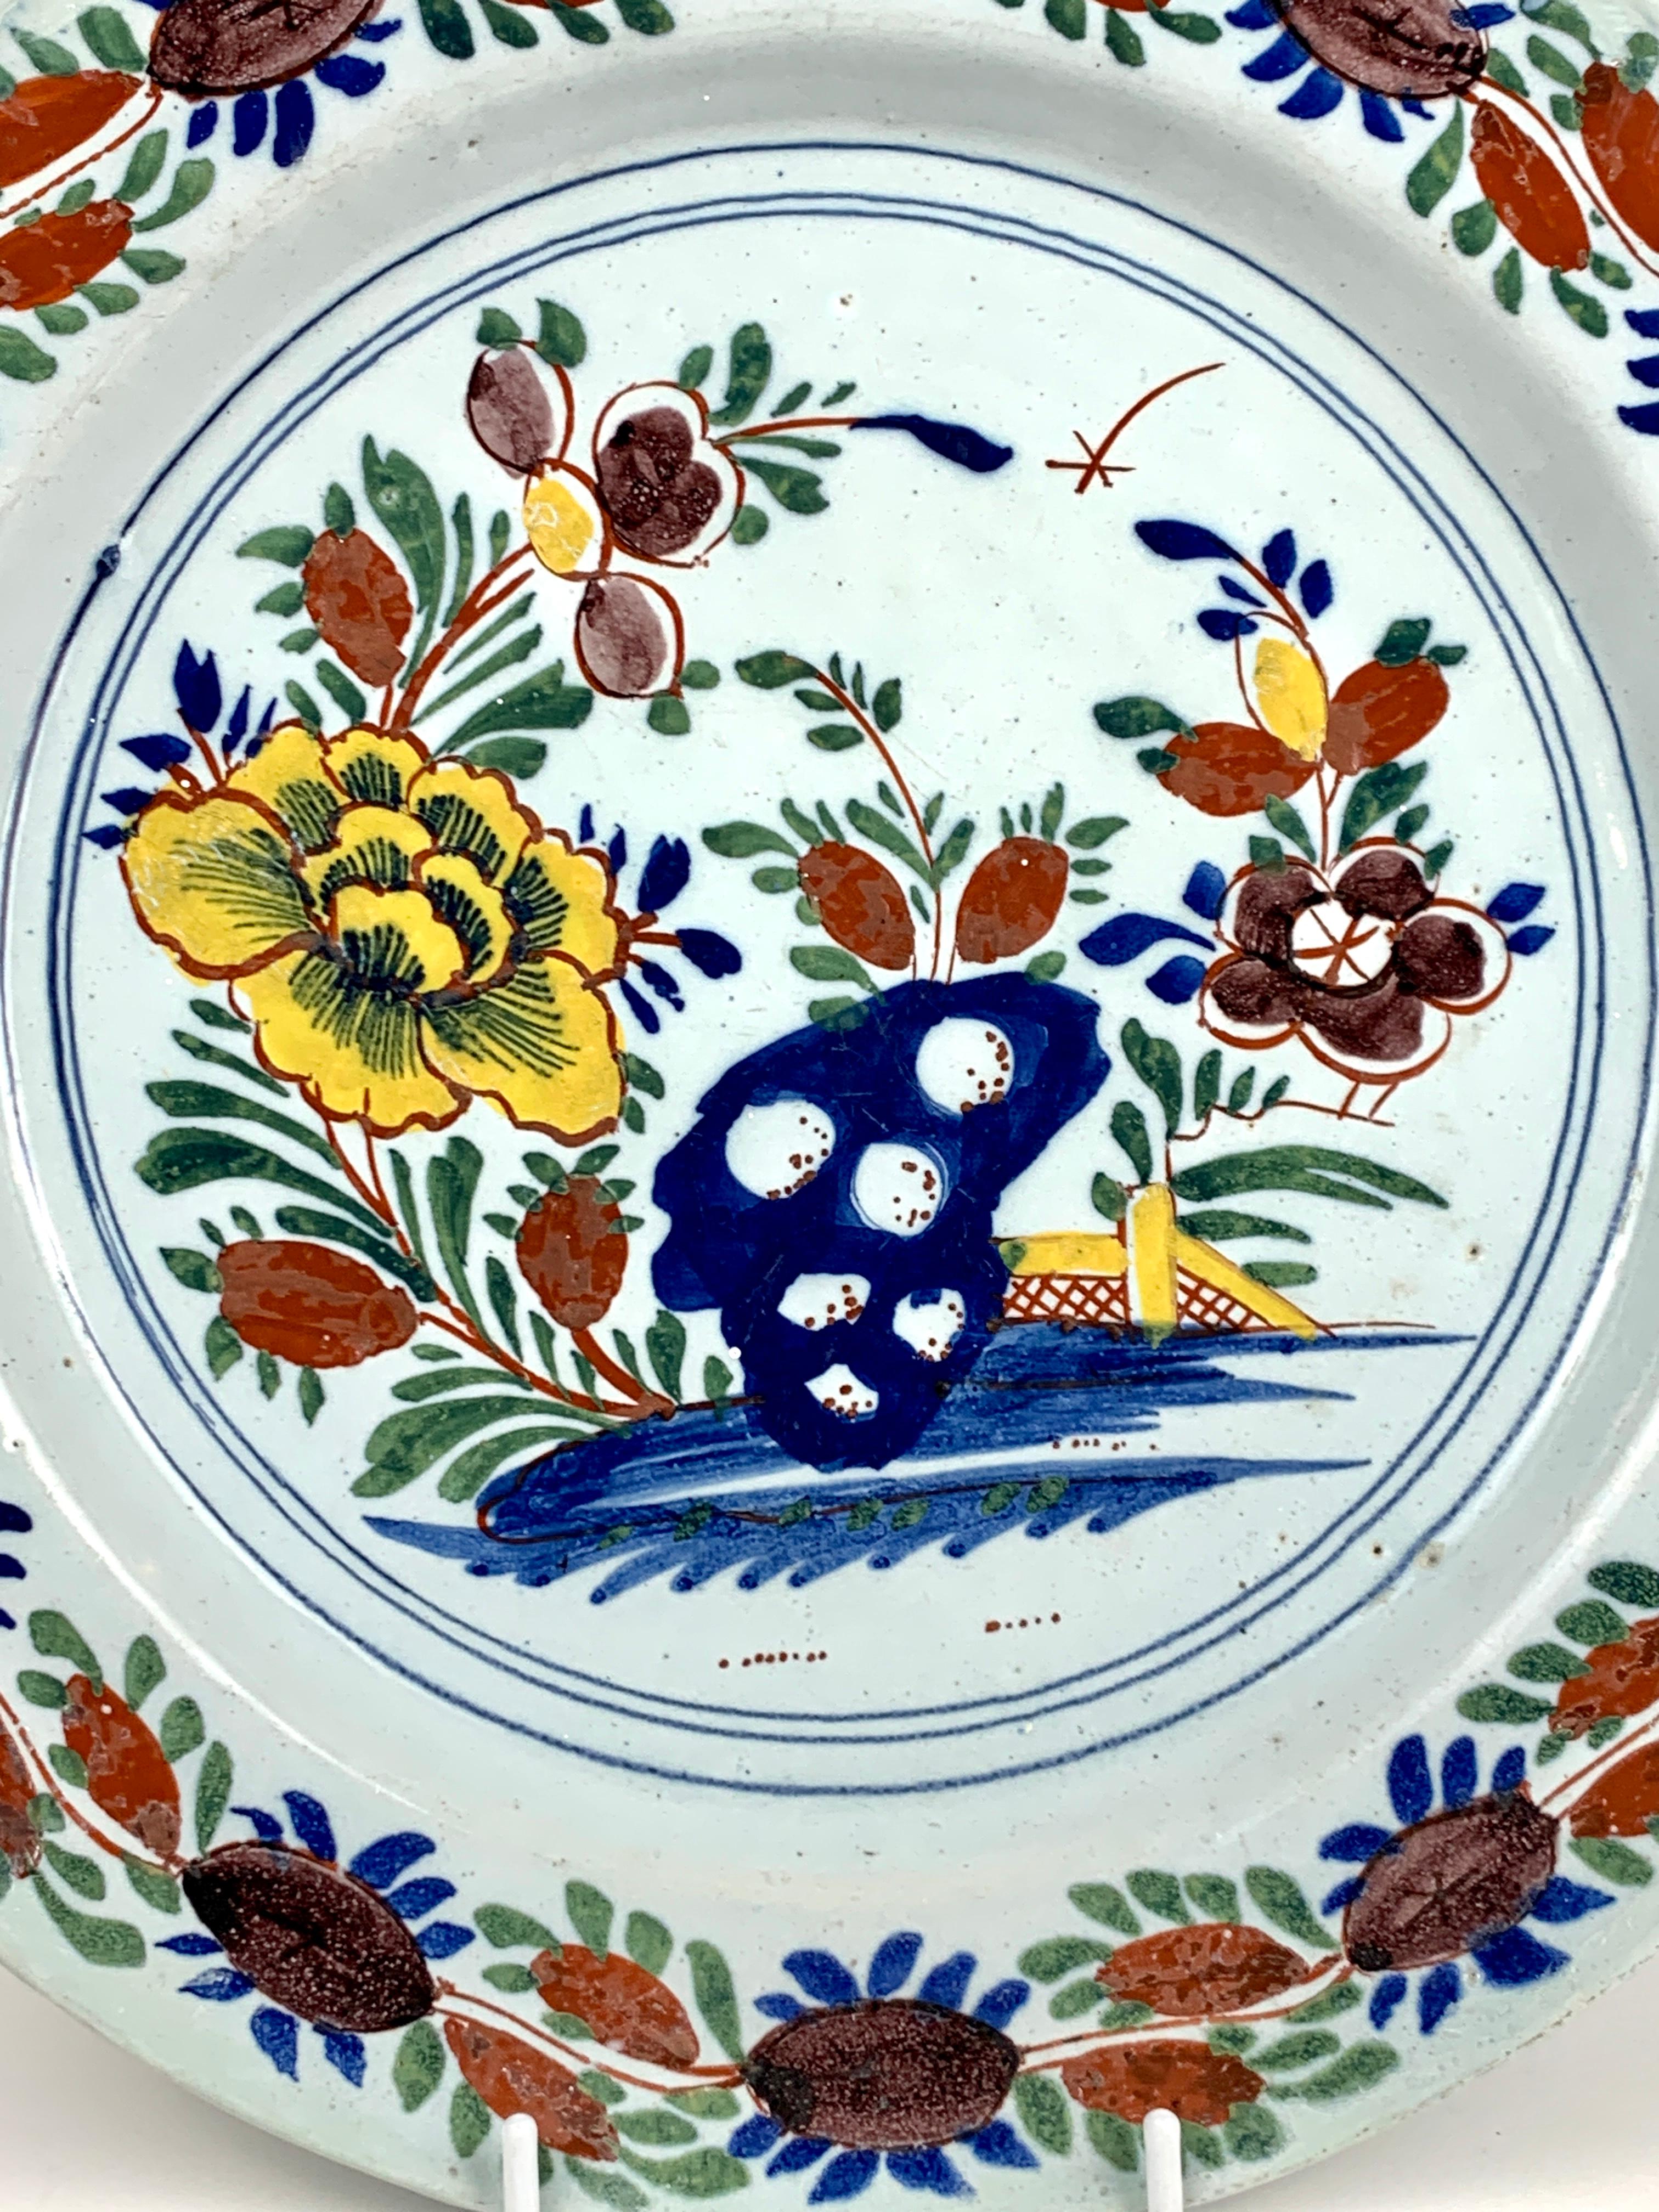 This antique Dutch Delft charger was made in the 18th century, circa 1770. 
It features a beautiful flower-filled garden hand painted in beautiful polychrome colors. 
We see a single large, bright yellow peony, other flowers painted in shades of